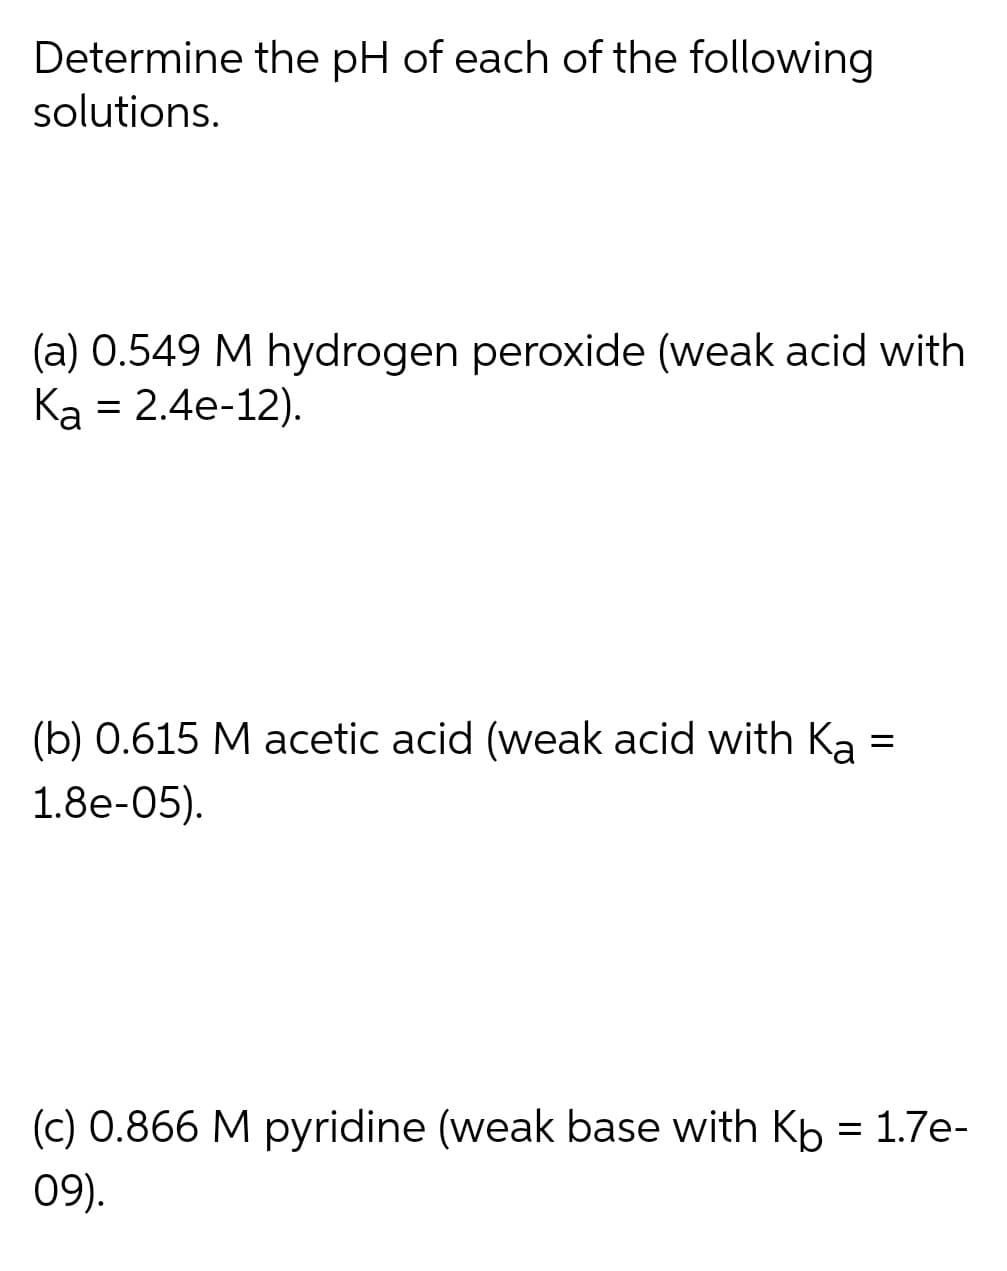 Determine the pH of each of the following
solutions.
(a) 0.549 M hydrogen peroxide (weak acid with
Ка 3 2.4e-12).
(b) 0.615 M acetic acid (weak acid with Ka
1.8e-05).
(c) 0.866 M pyridine (weak base with Kp = 1.7e-
09).
